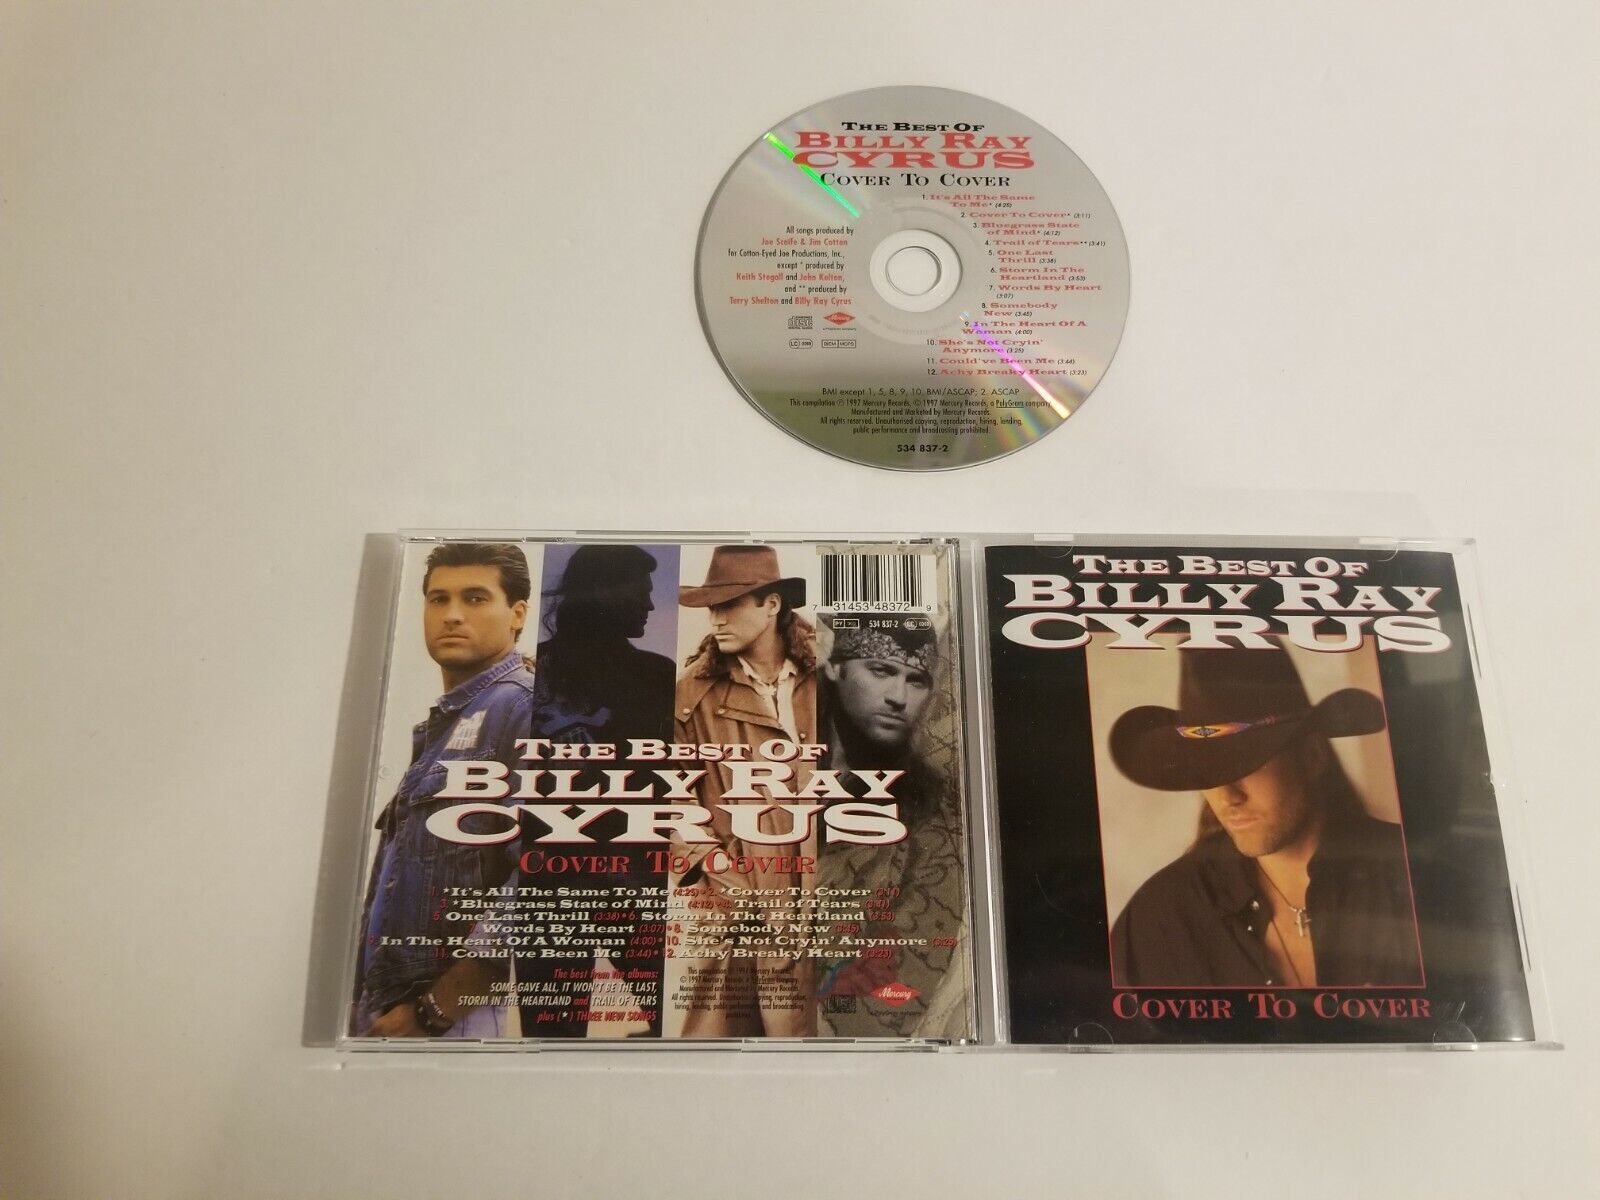 Primary image for Cover To Cover (Best Of) by Billy Ray Cyrus (CD, 1997, Mercury)